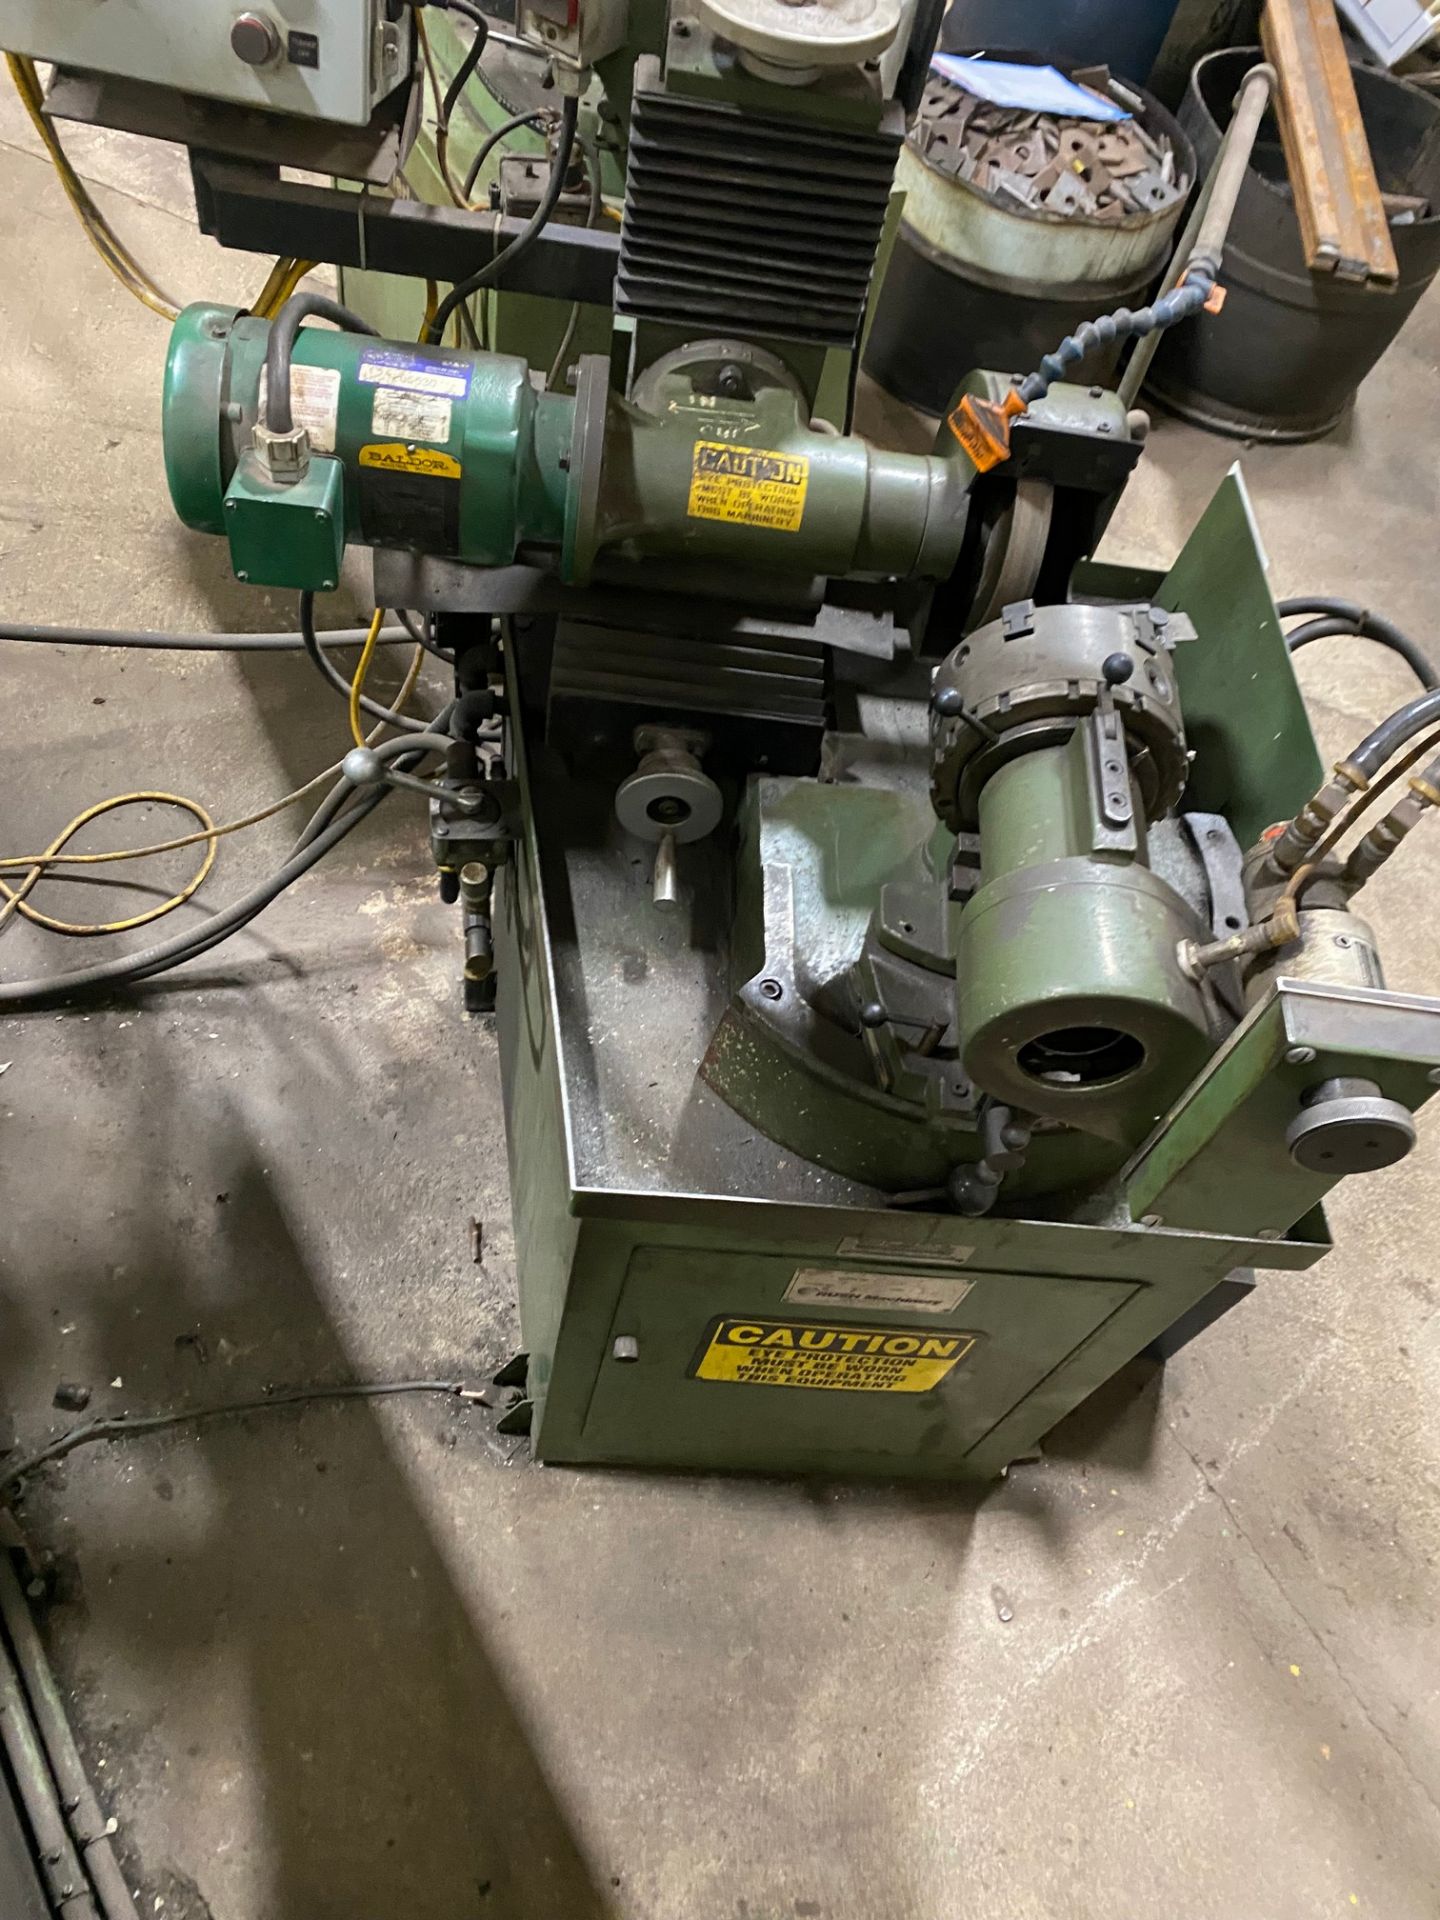 RUSH MACHINERY TOOL CUTTER GRINDER, MODEL 250A, S/N 2952 (RIGGING FEE $150) - Image 3 of 5